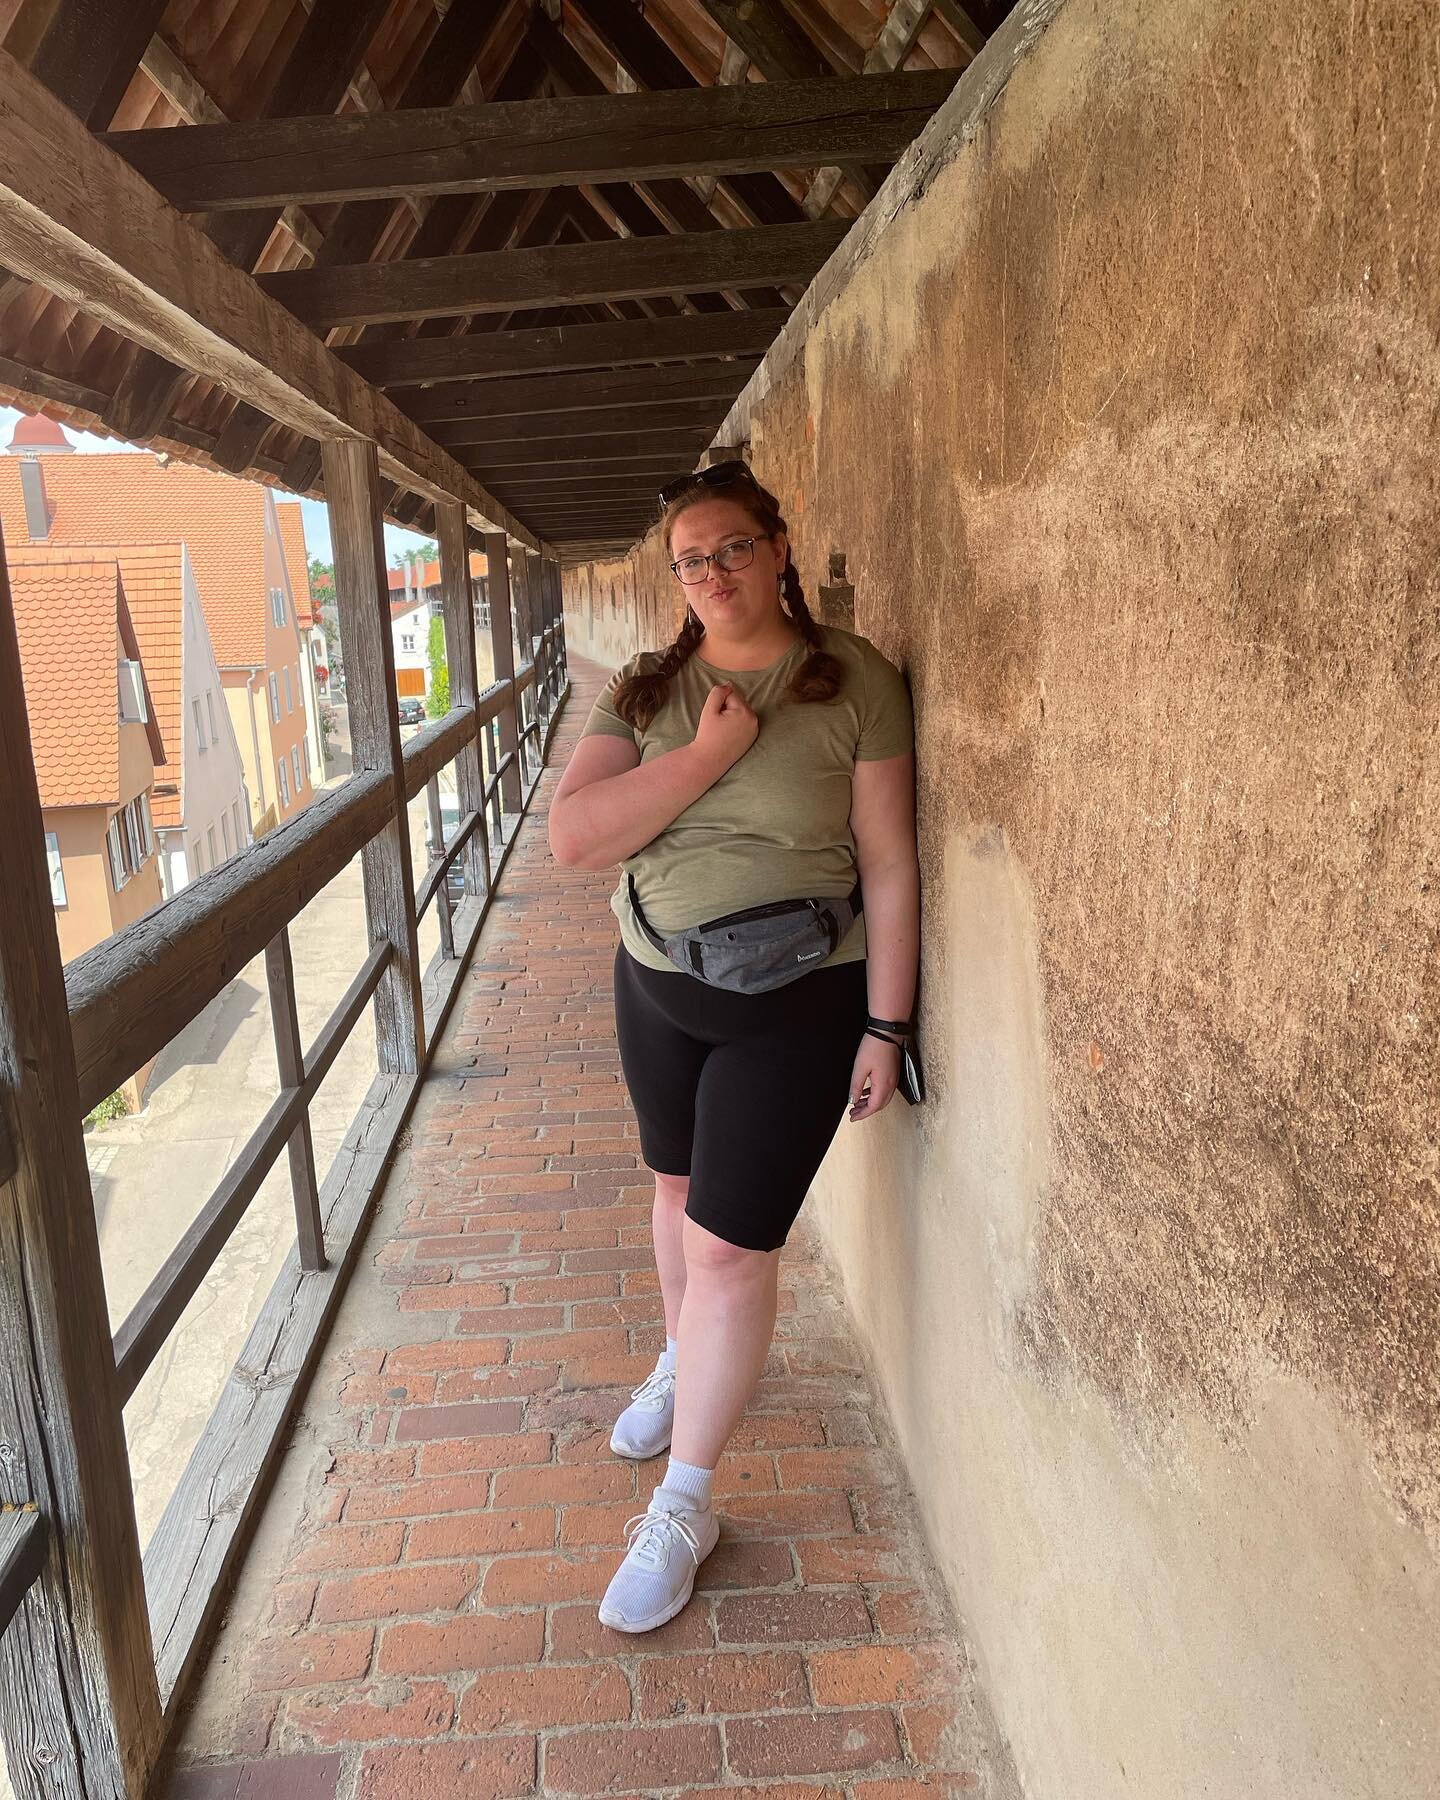 N&ouml;rdlingen&hellip; rumored to have inspired @attackontitan !🥹😍
My not-so-inner Fangirl was giddy, skipping, hopping, and singing most of the trip! 🤩
Wall walking, AoT fan messages, a 350 stair climb, 90m stunning views!

What&rsquo;s even mor